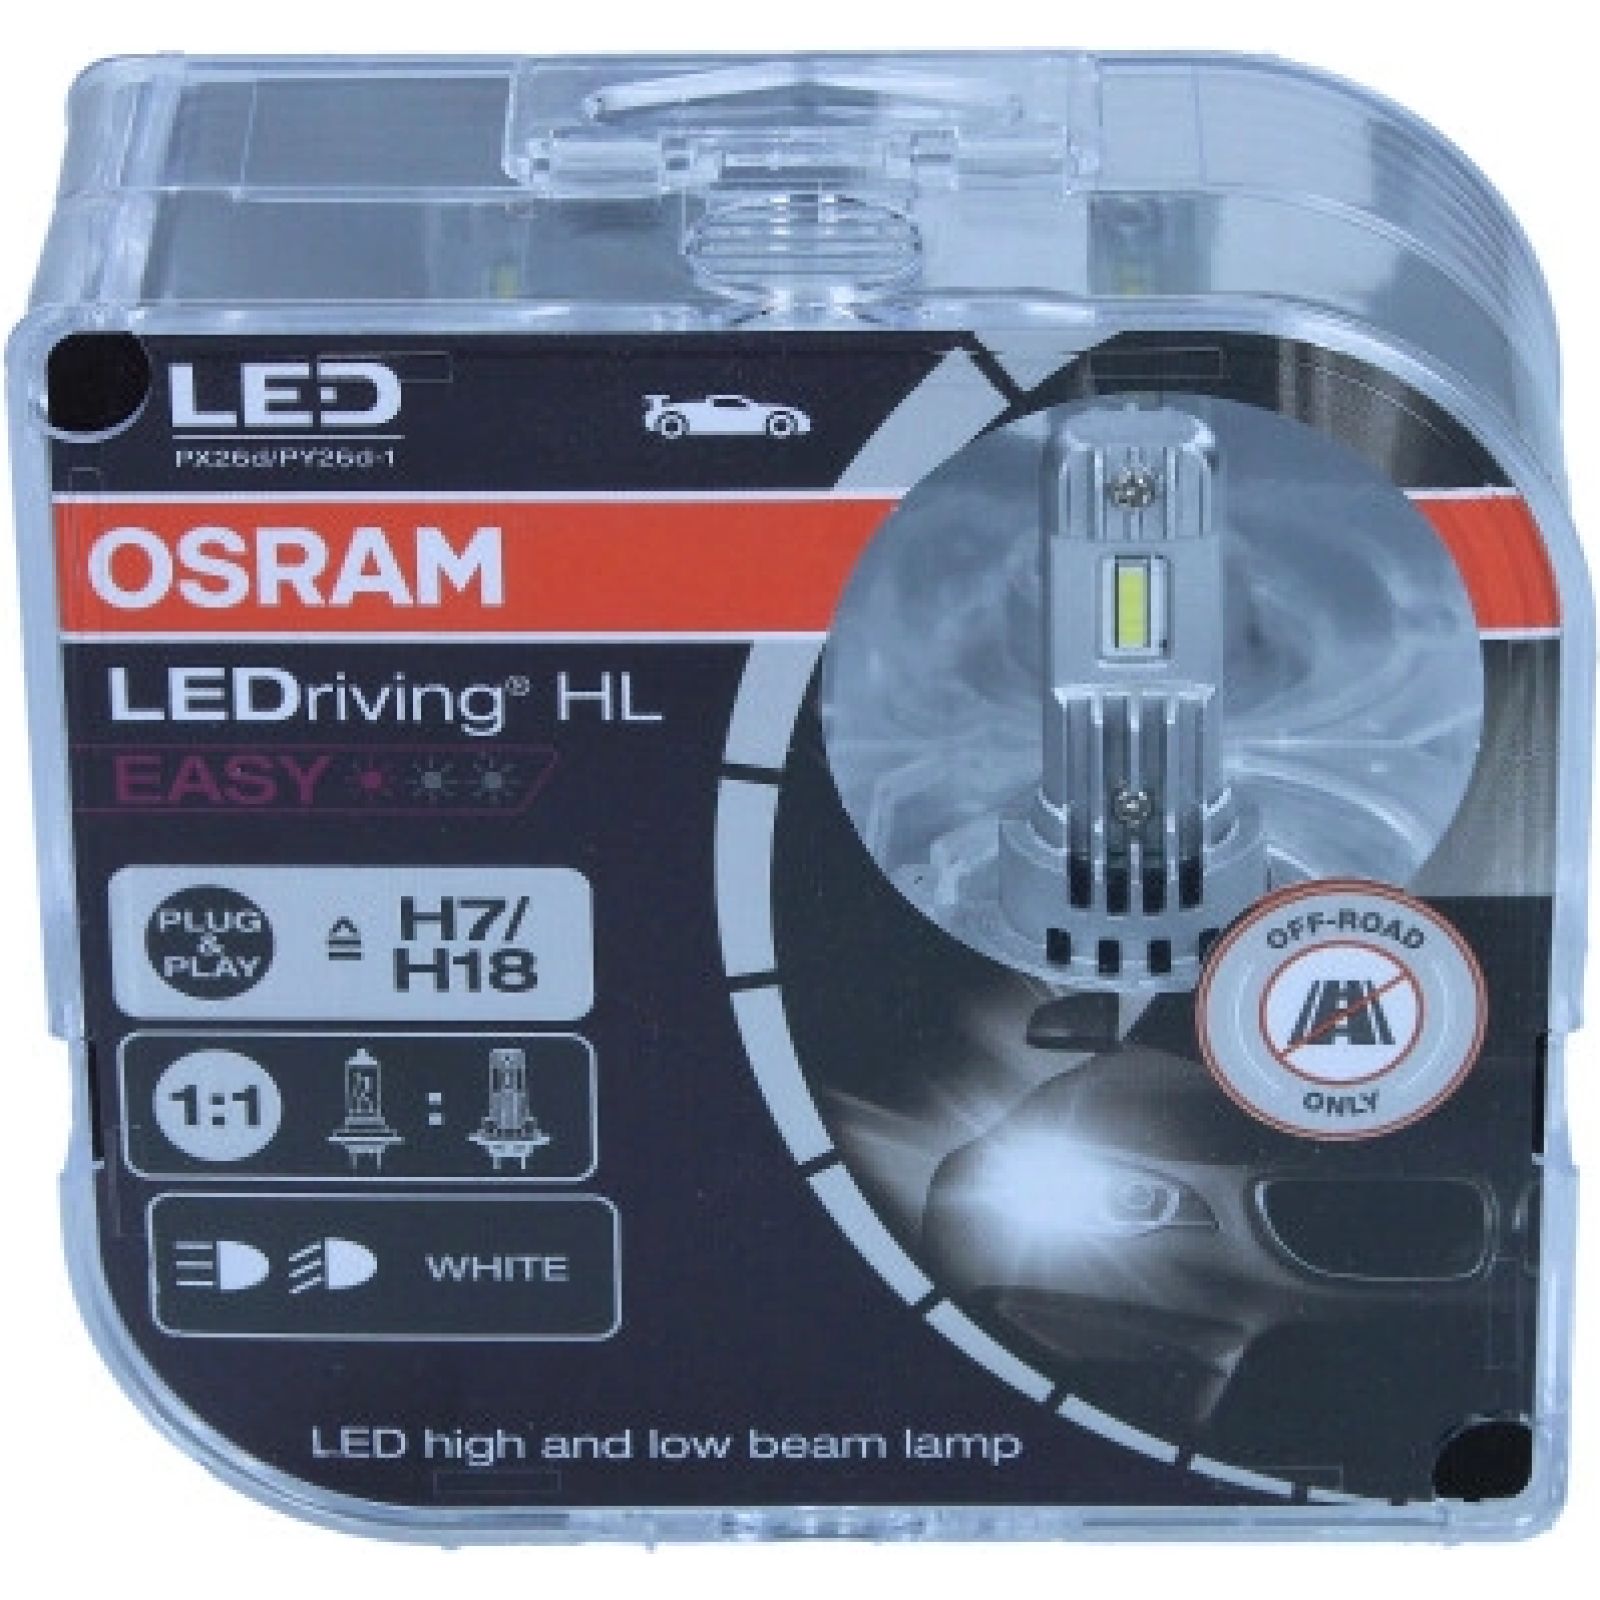 OSRAM LEDriving HL EASY - Installation of H7 (64210DWESY) in a Fiat 500 